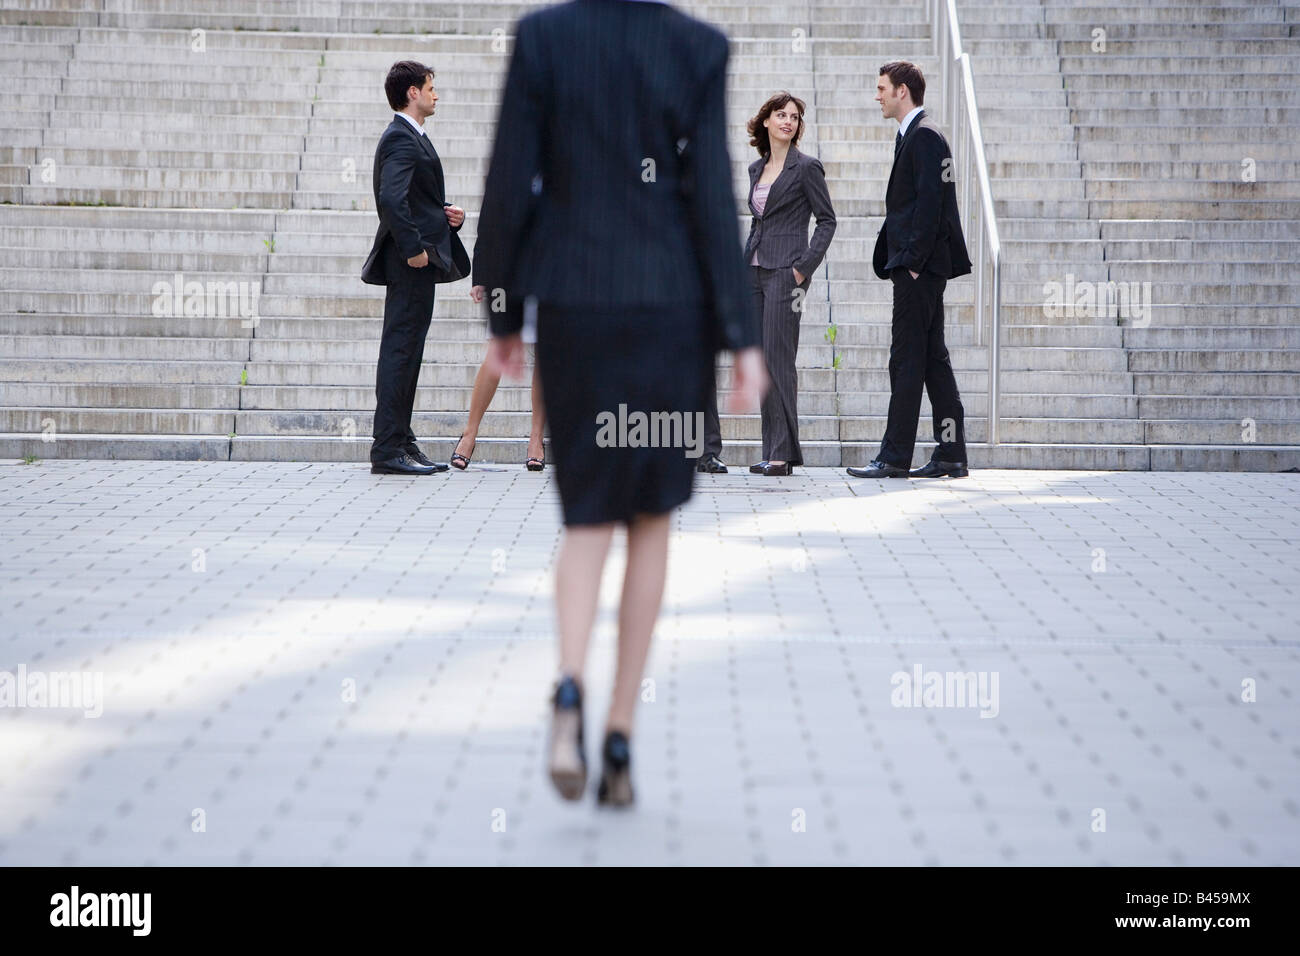 Germany, Baden-Württemberg, Stuttgart, Businesswoman walking, businesspeople in the foreground Stock Photo